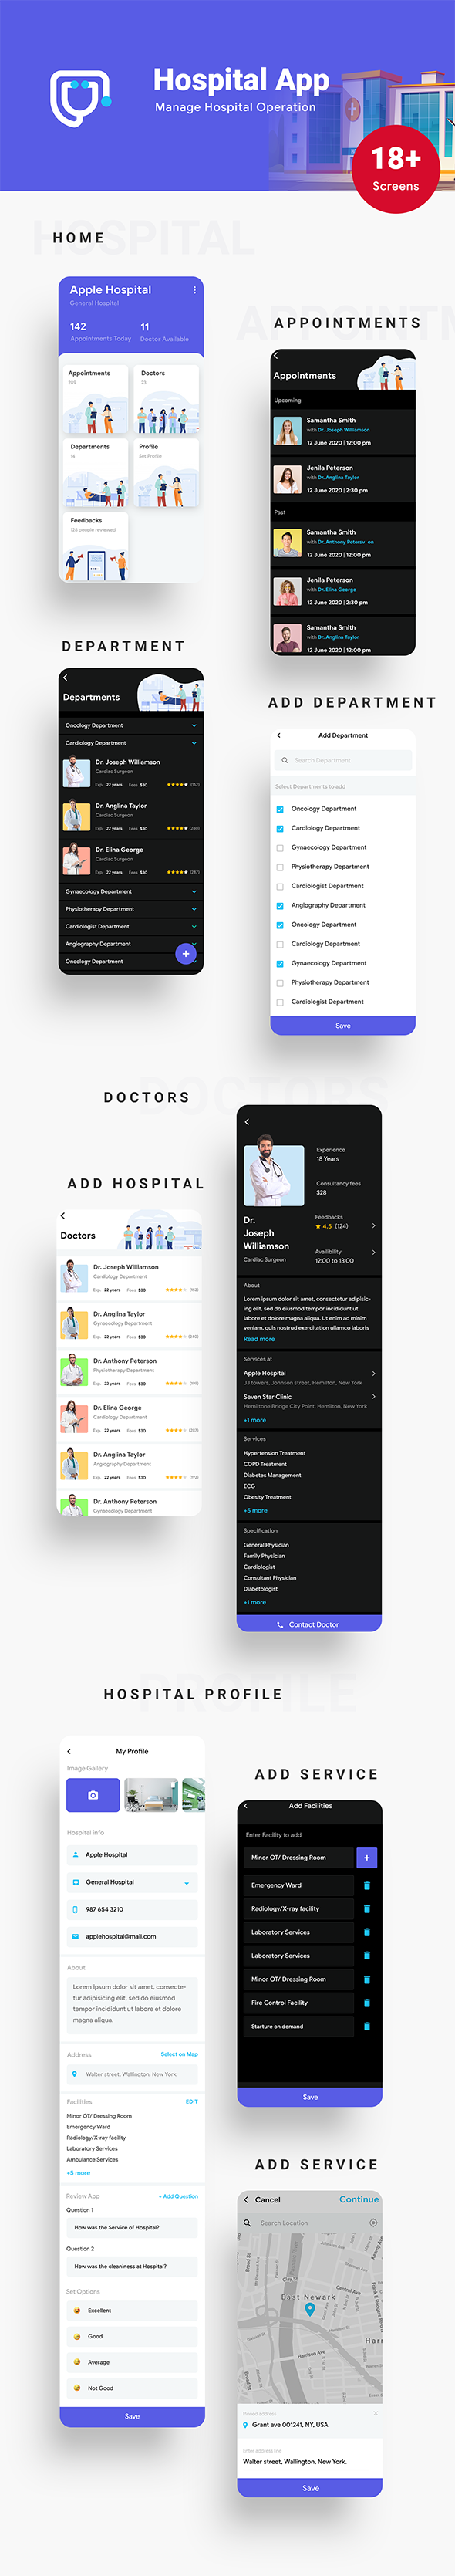 17 Template| Doctor Appointment Booking| Hospital management POS system| Medicine Delivery| Doctopro - 14